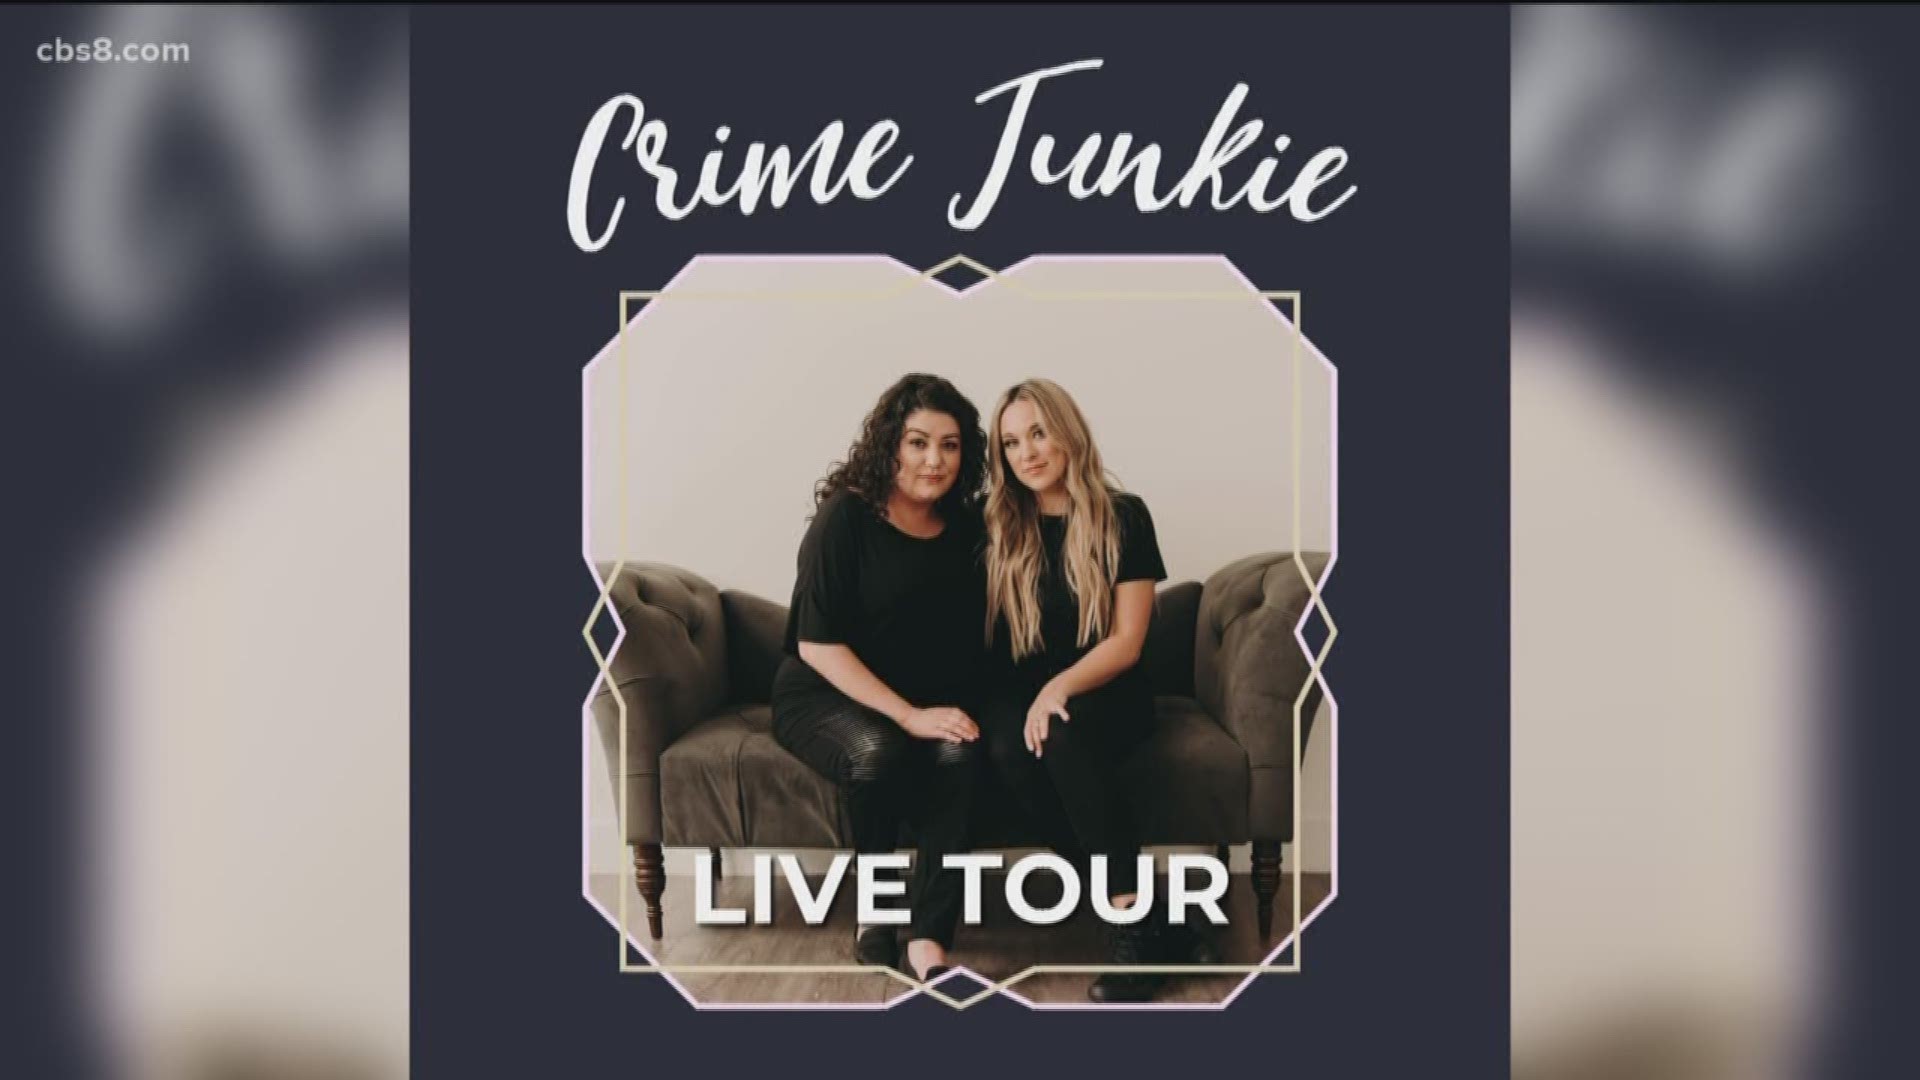 Crime Junkie's Ashley Flowers and Brit Prawat joins News 8 to discuss how their podcasts helped solved crimes as well as their live podcast show in San Diego